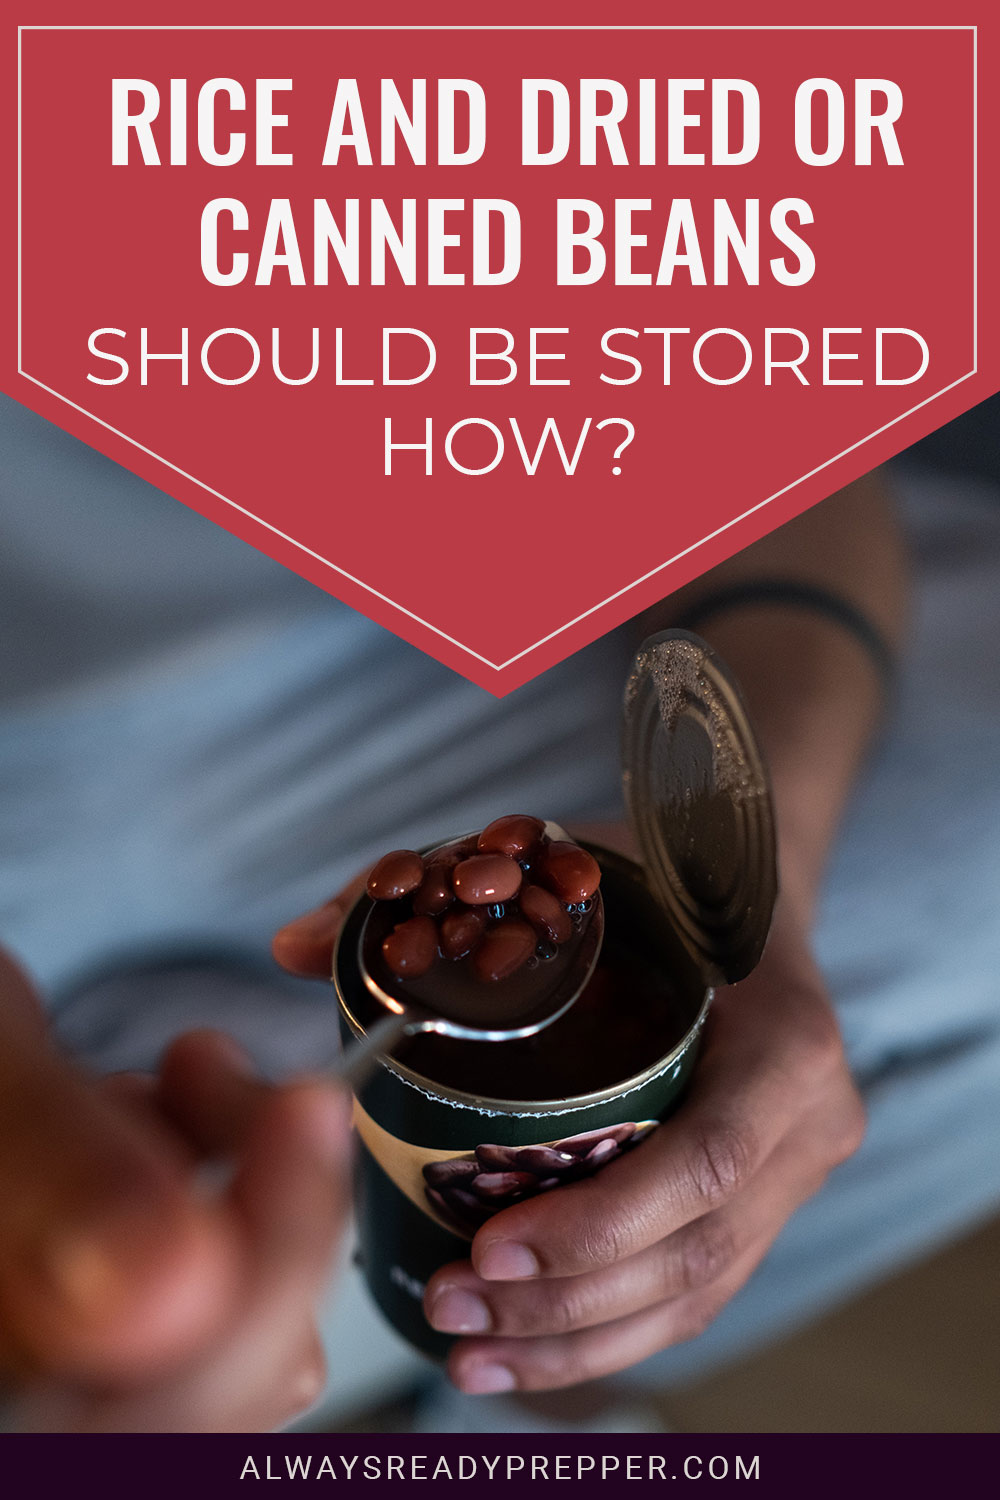 Beans on a spoon and a can in hands - Rice and Dried or Canned Beans Should Be Stored How?